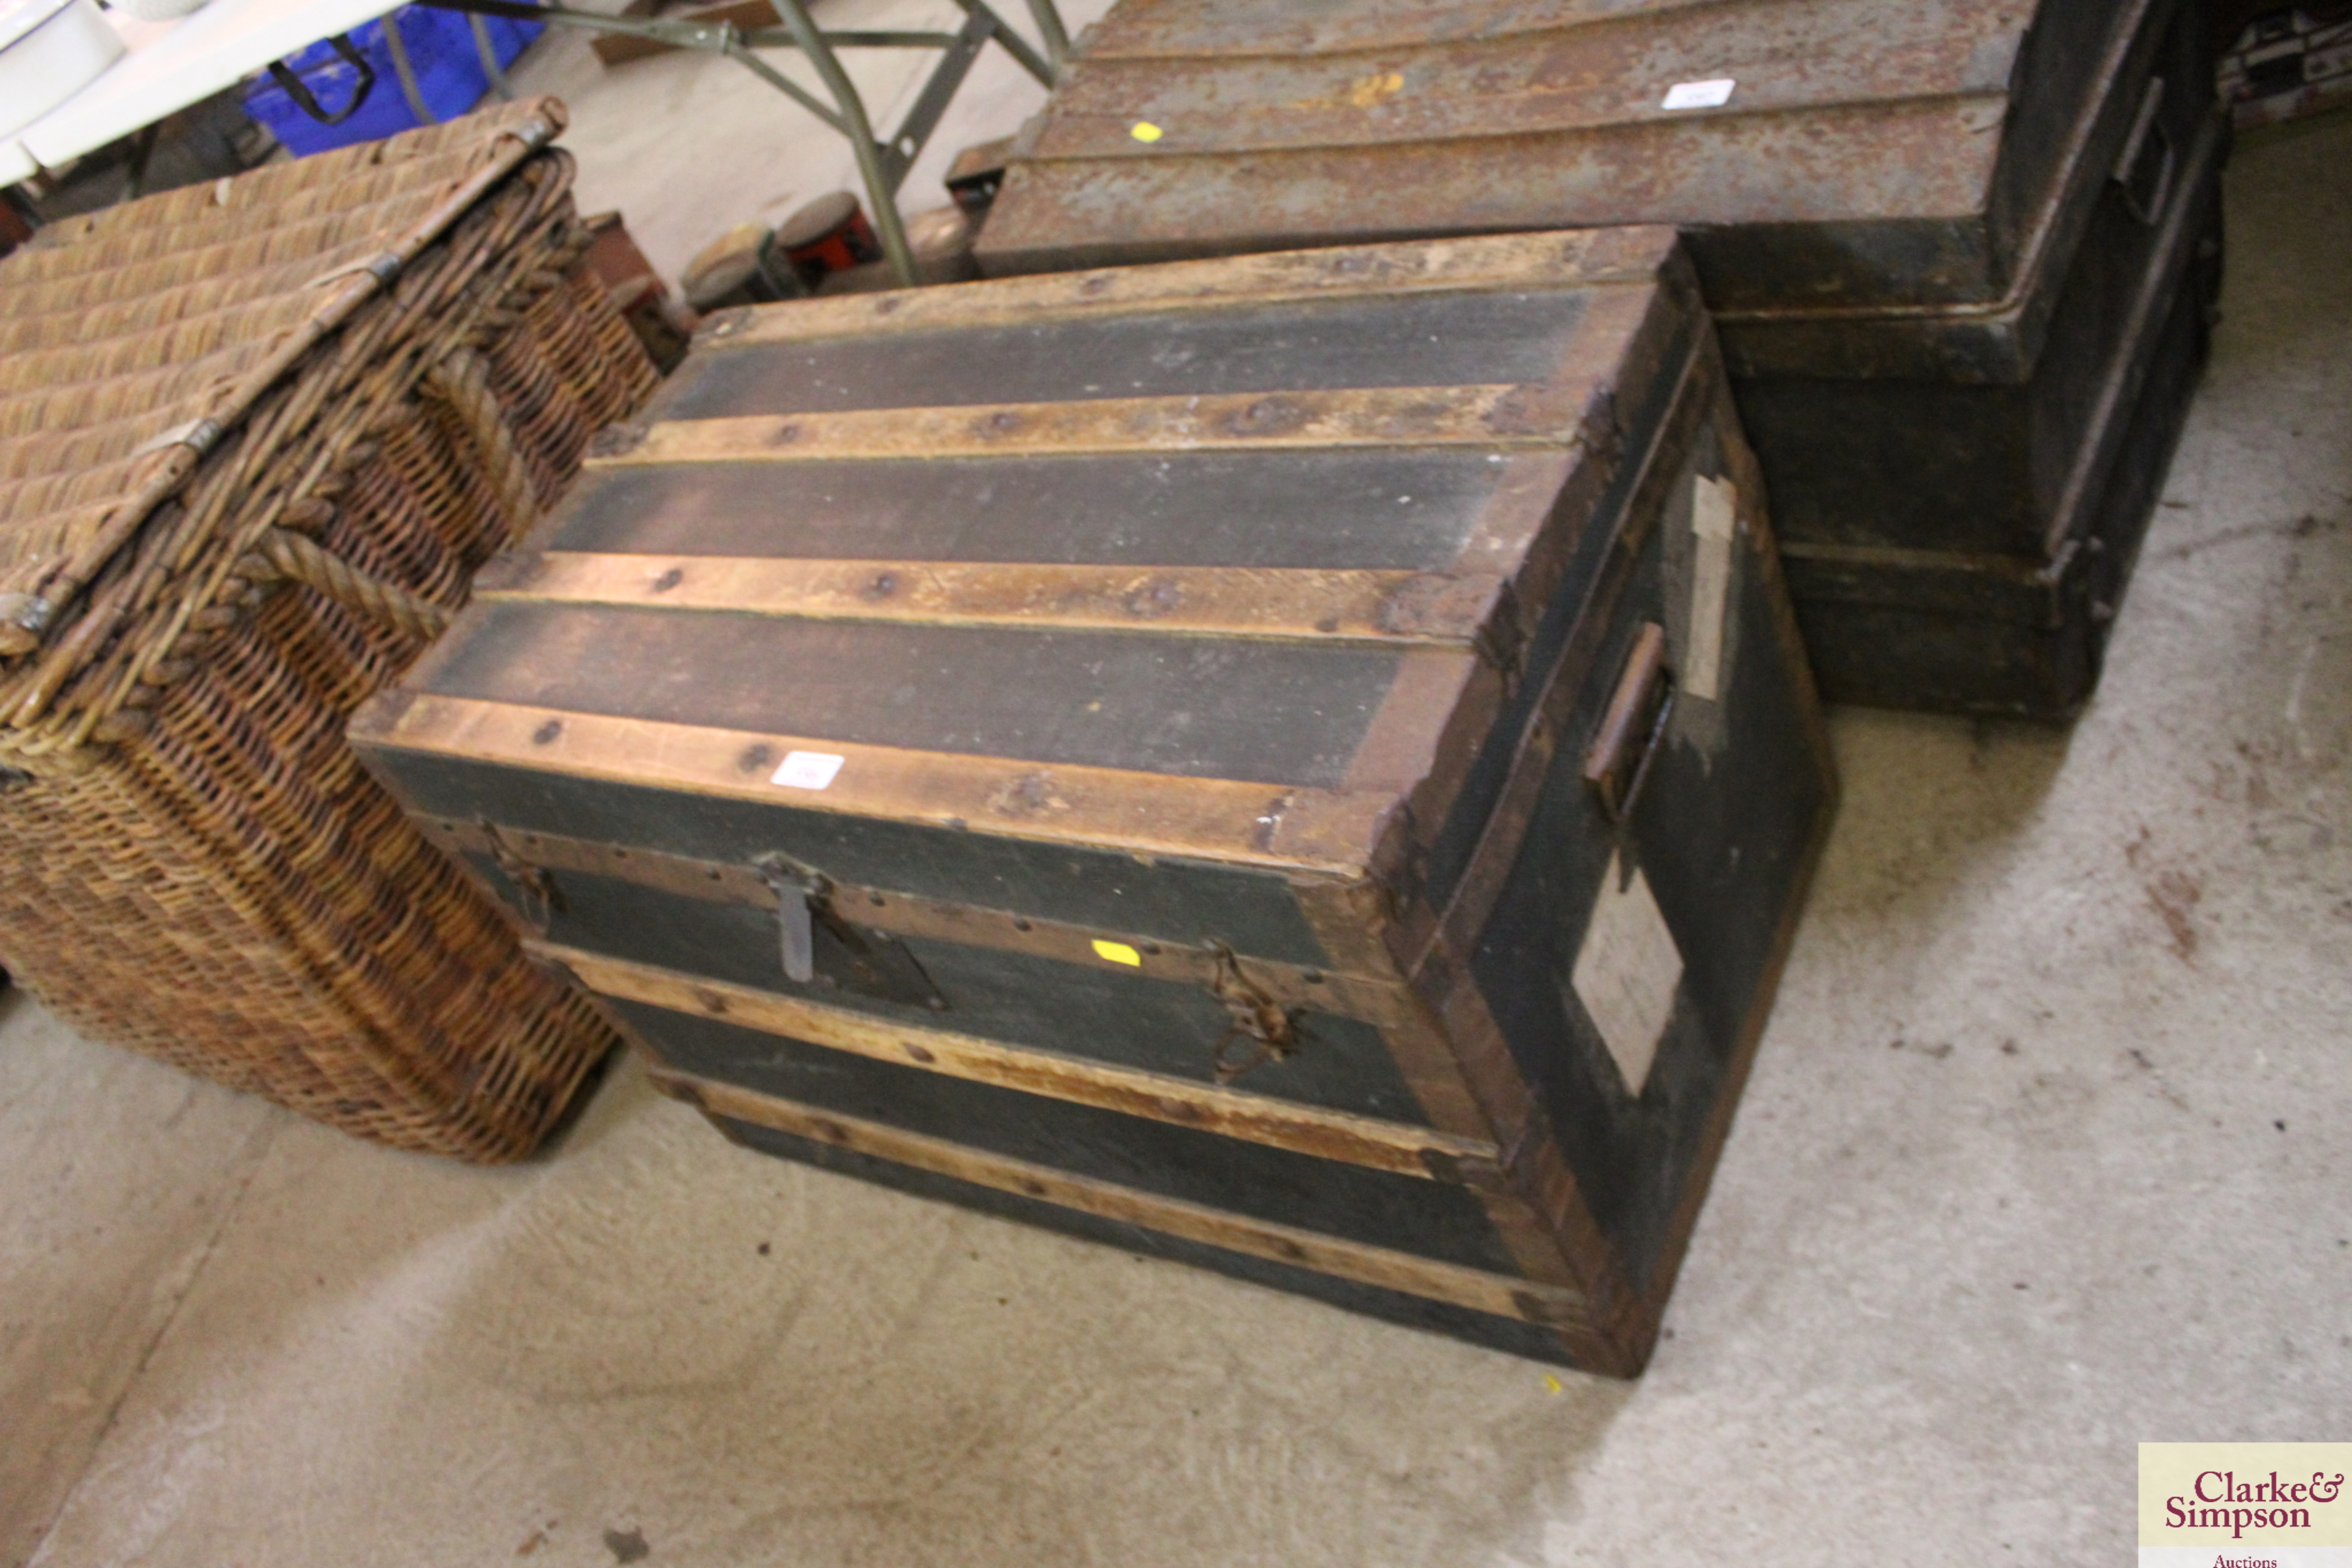 A canvas and wood and metal bound travelling trunk